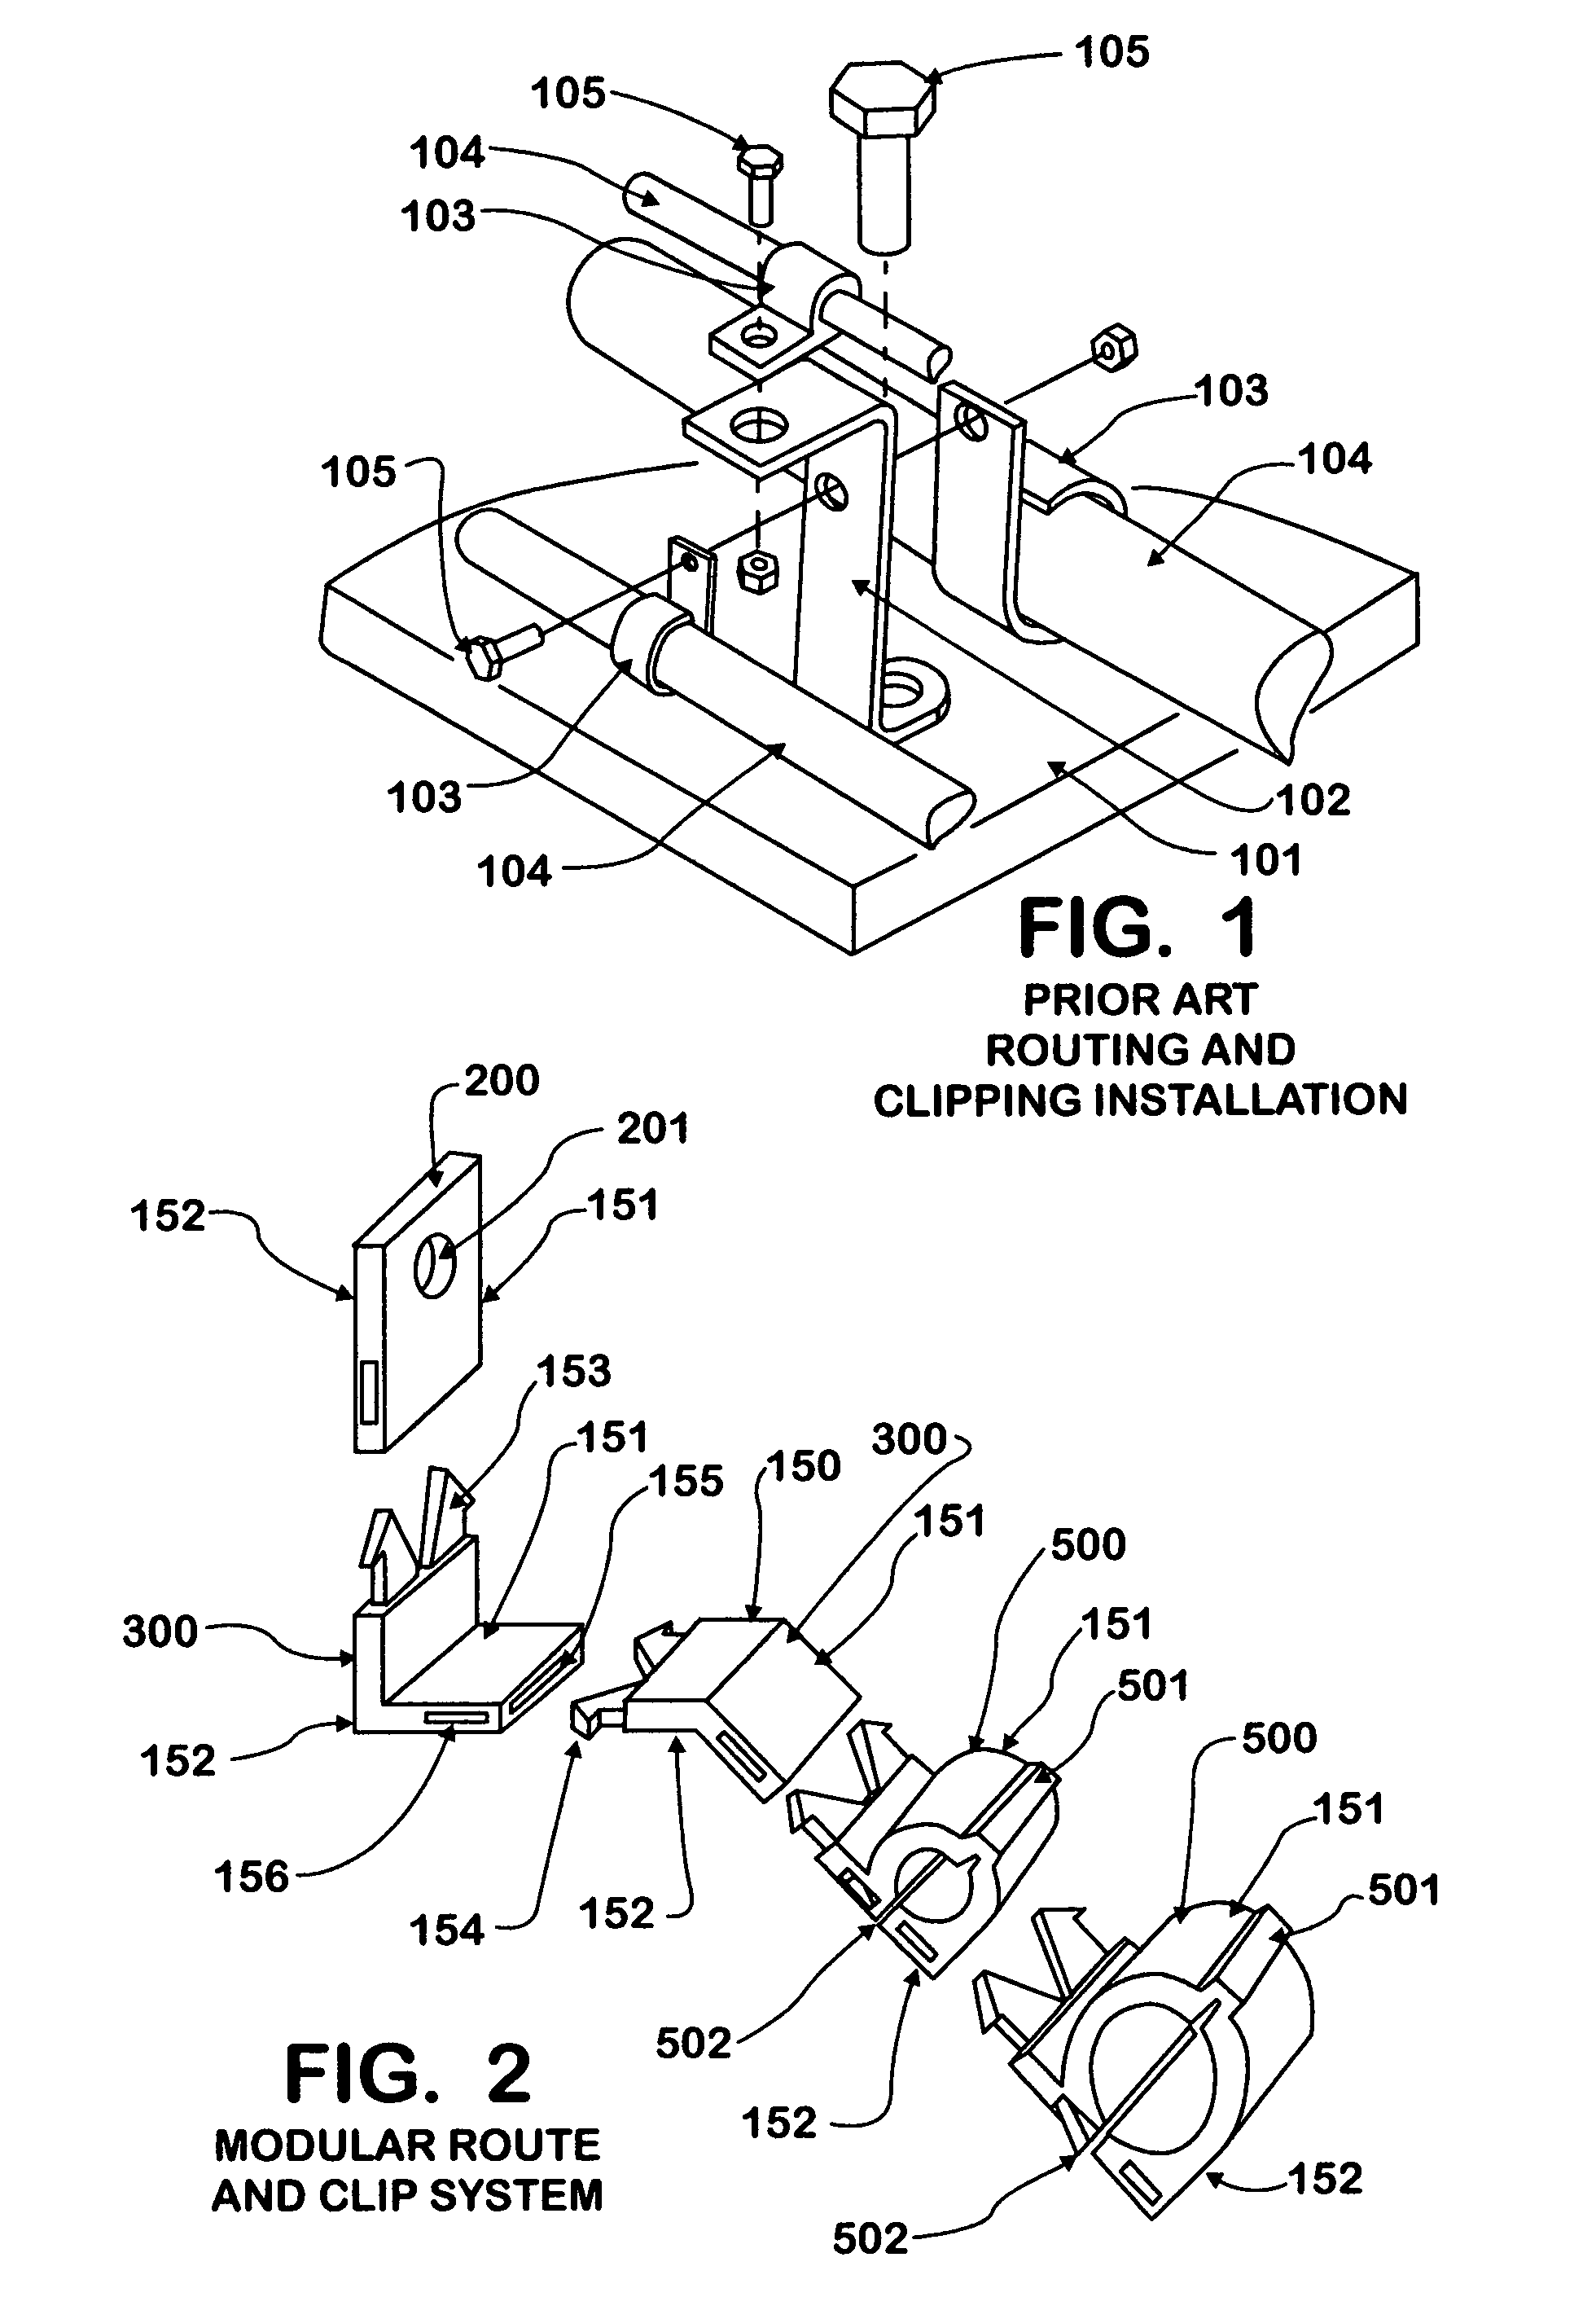 Routing clip elements with a living hinge and interlocking closure